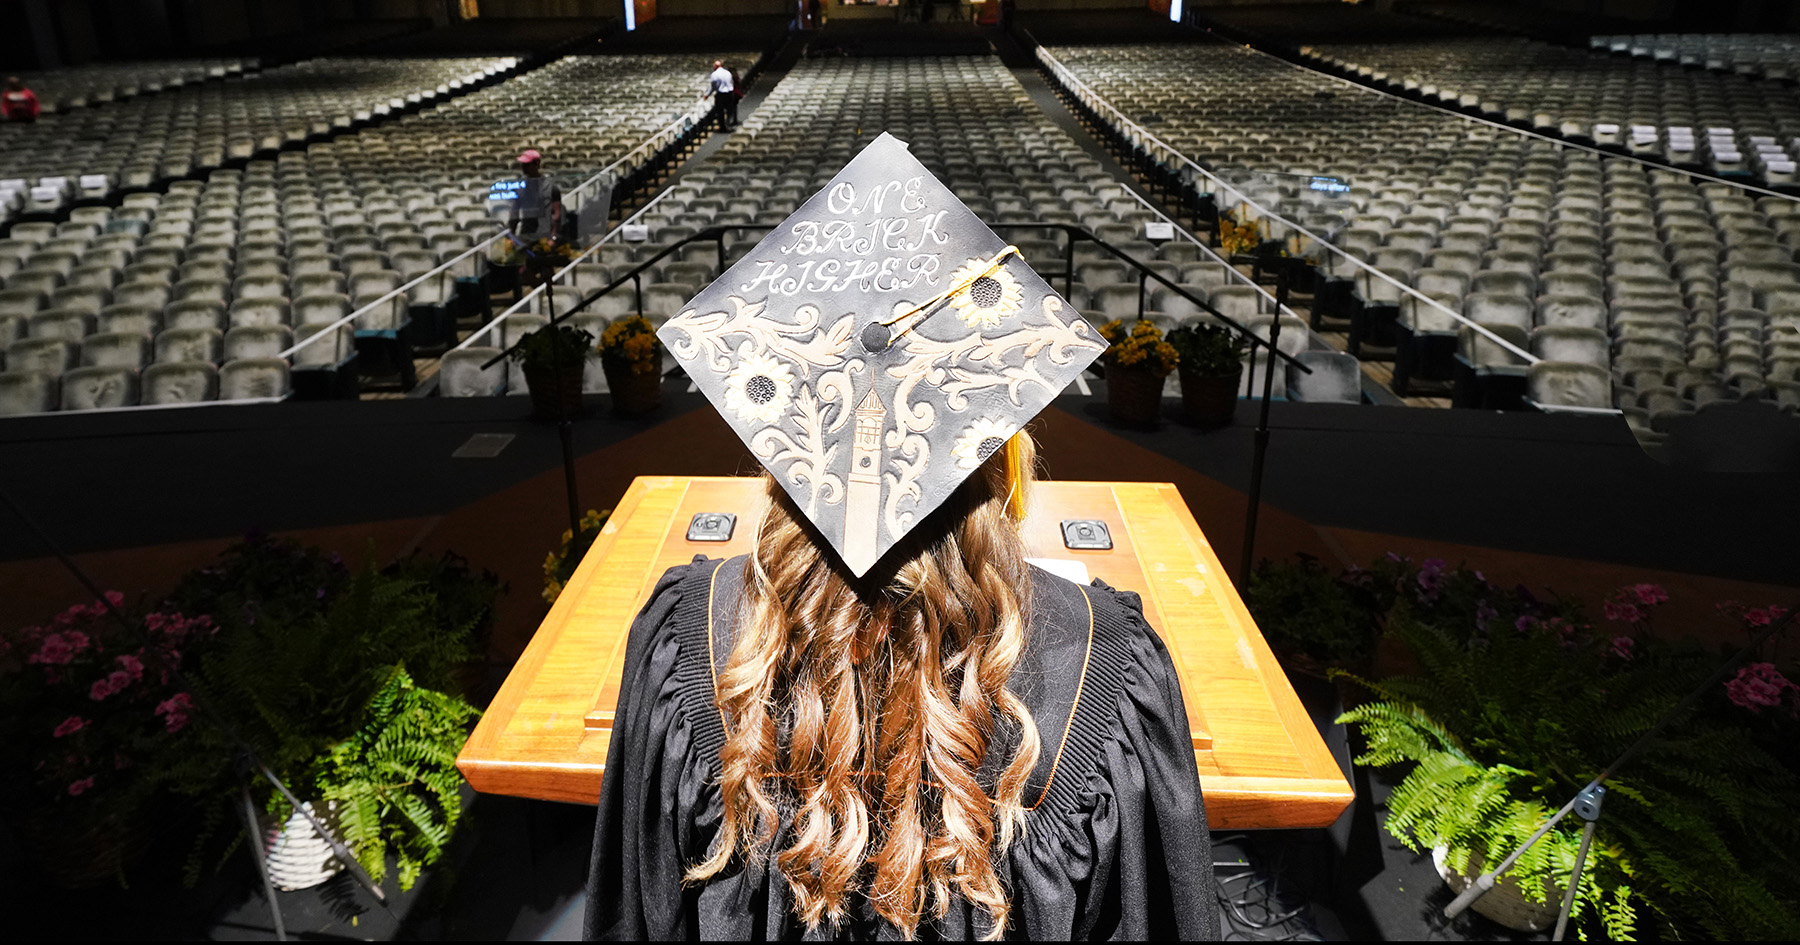 Grace Hasler standing at podium wearing a graduation cap and facing an empty hall